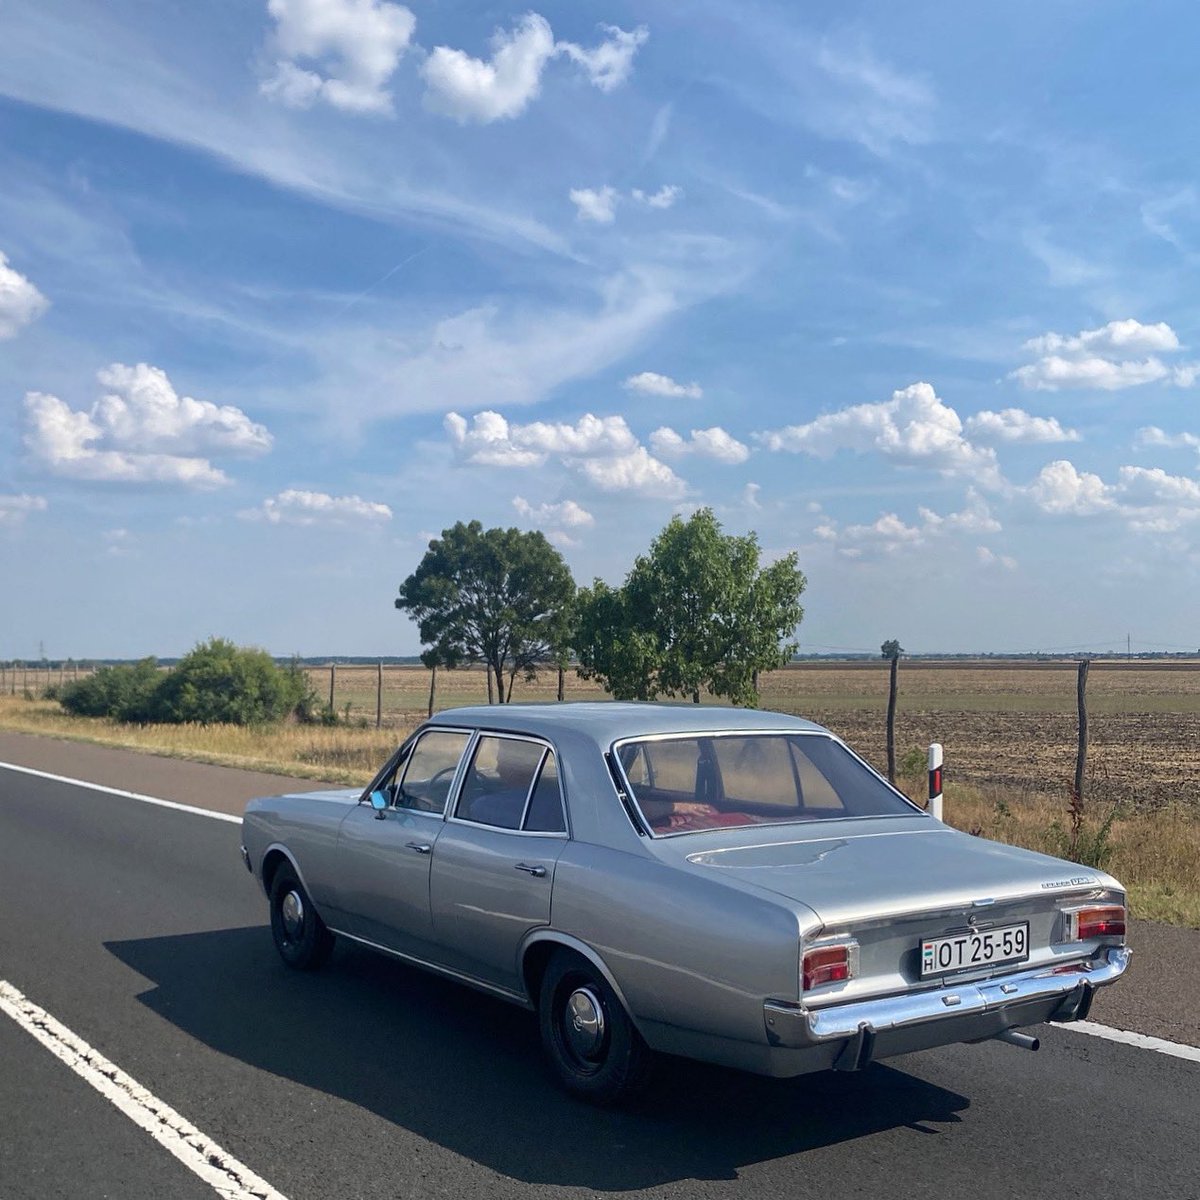 Get out & drive!

Opel Rekord (C, 1971) spotted in Hungary.
#OpelRekord #ASundayCarPic #GetOutAndDrive 
@GeorgeCochrane1 @addict_car @YesterdaysDrive @Opel